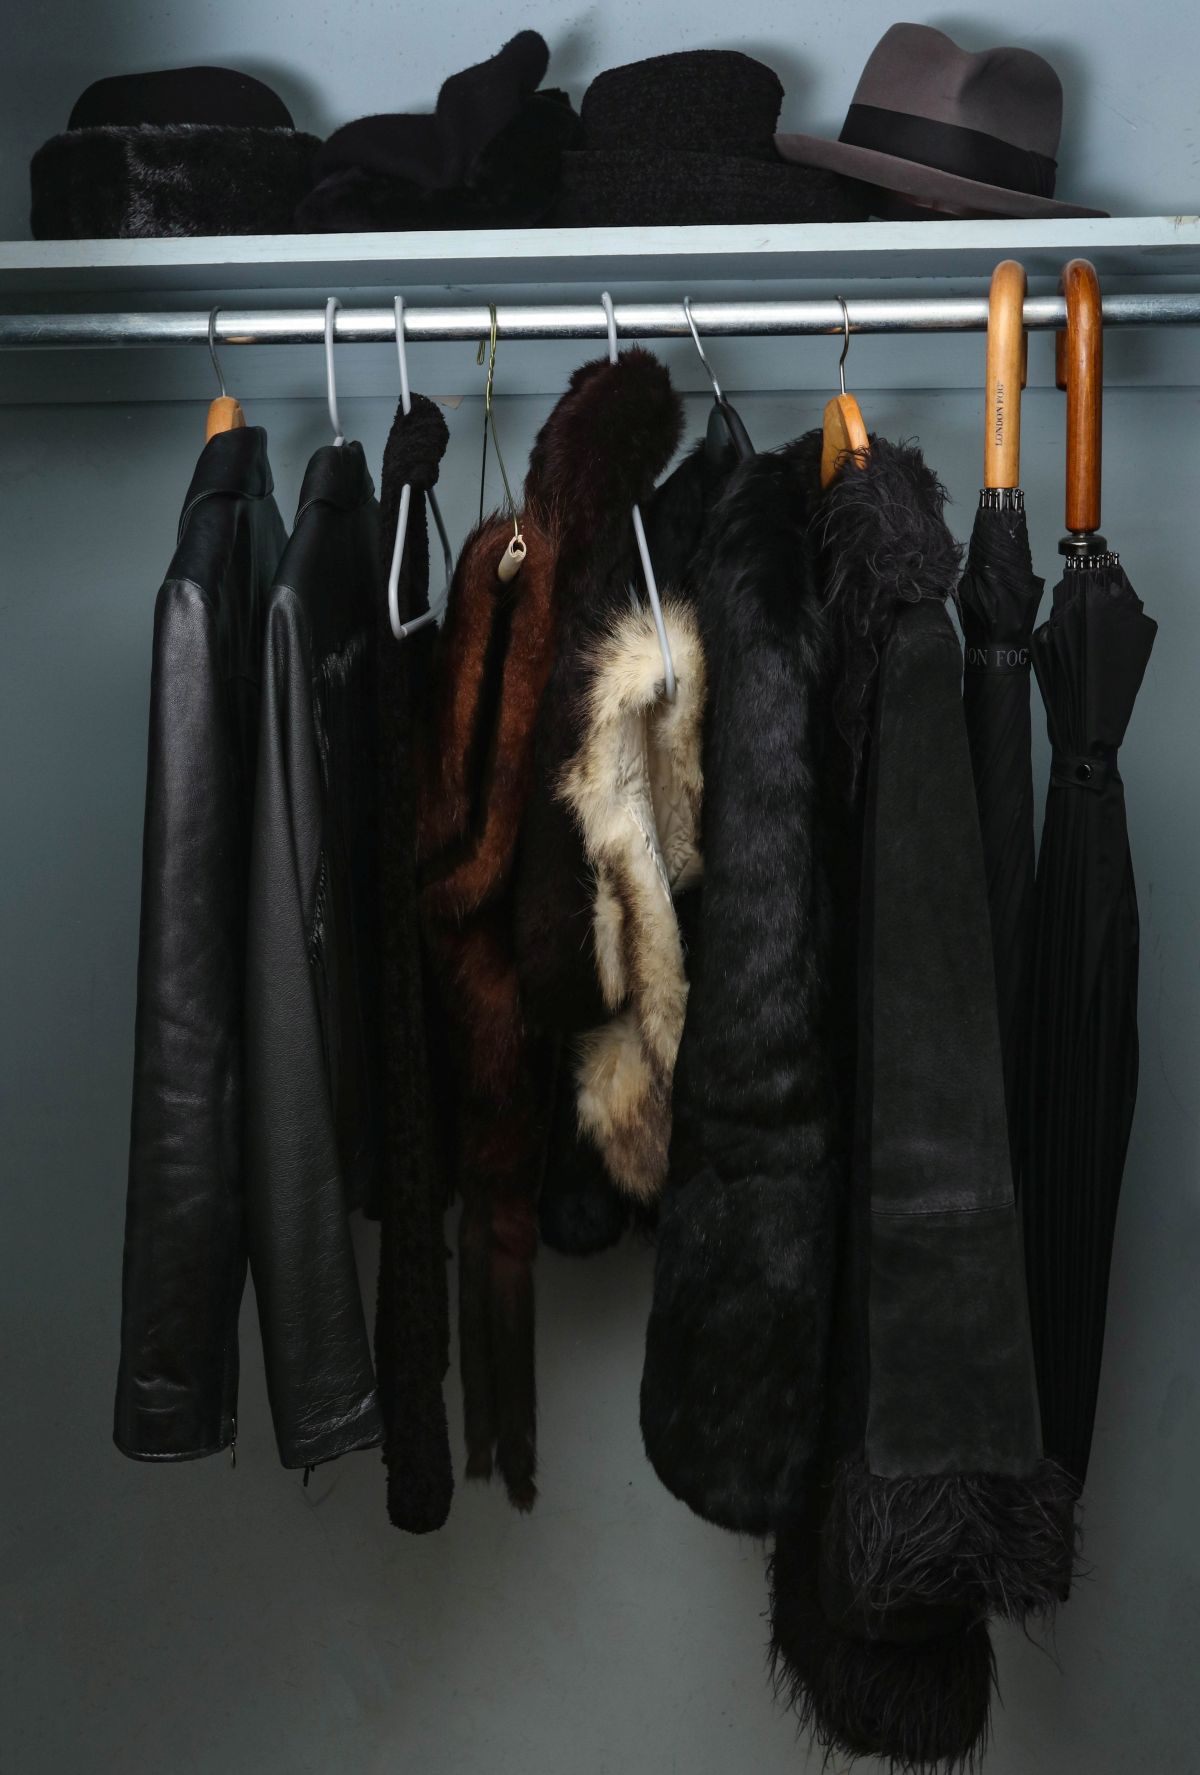 LEATHER JACKETS, HATS AND FURS